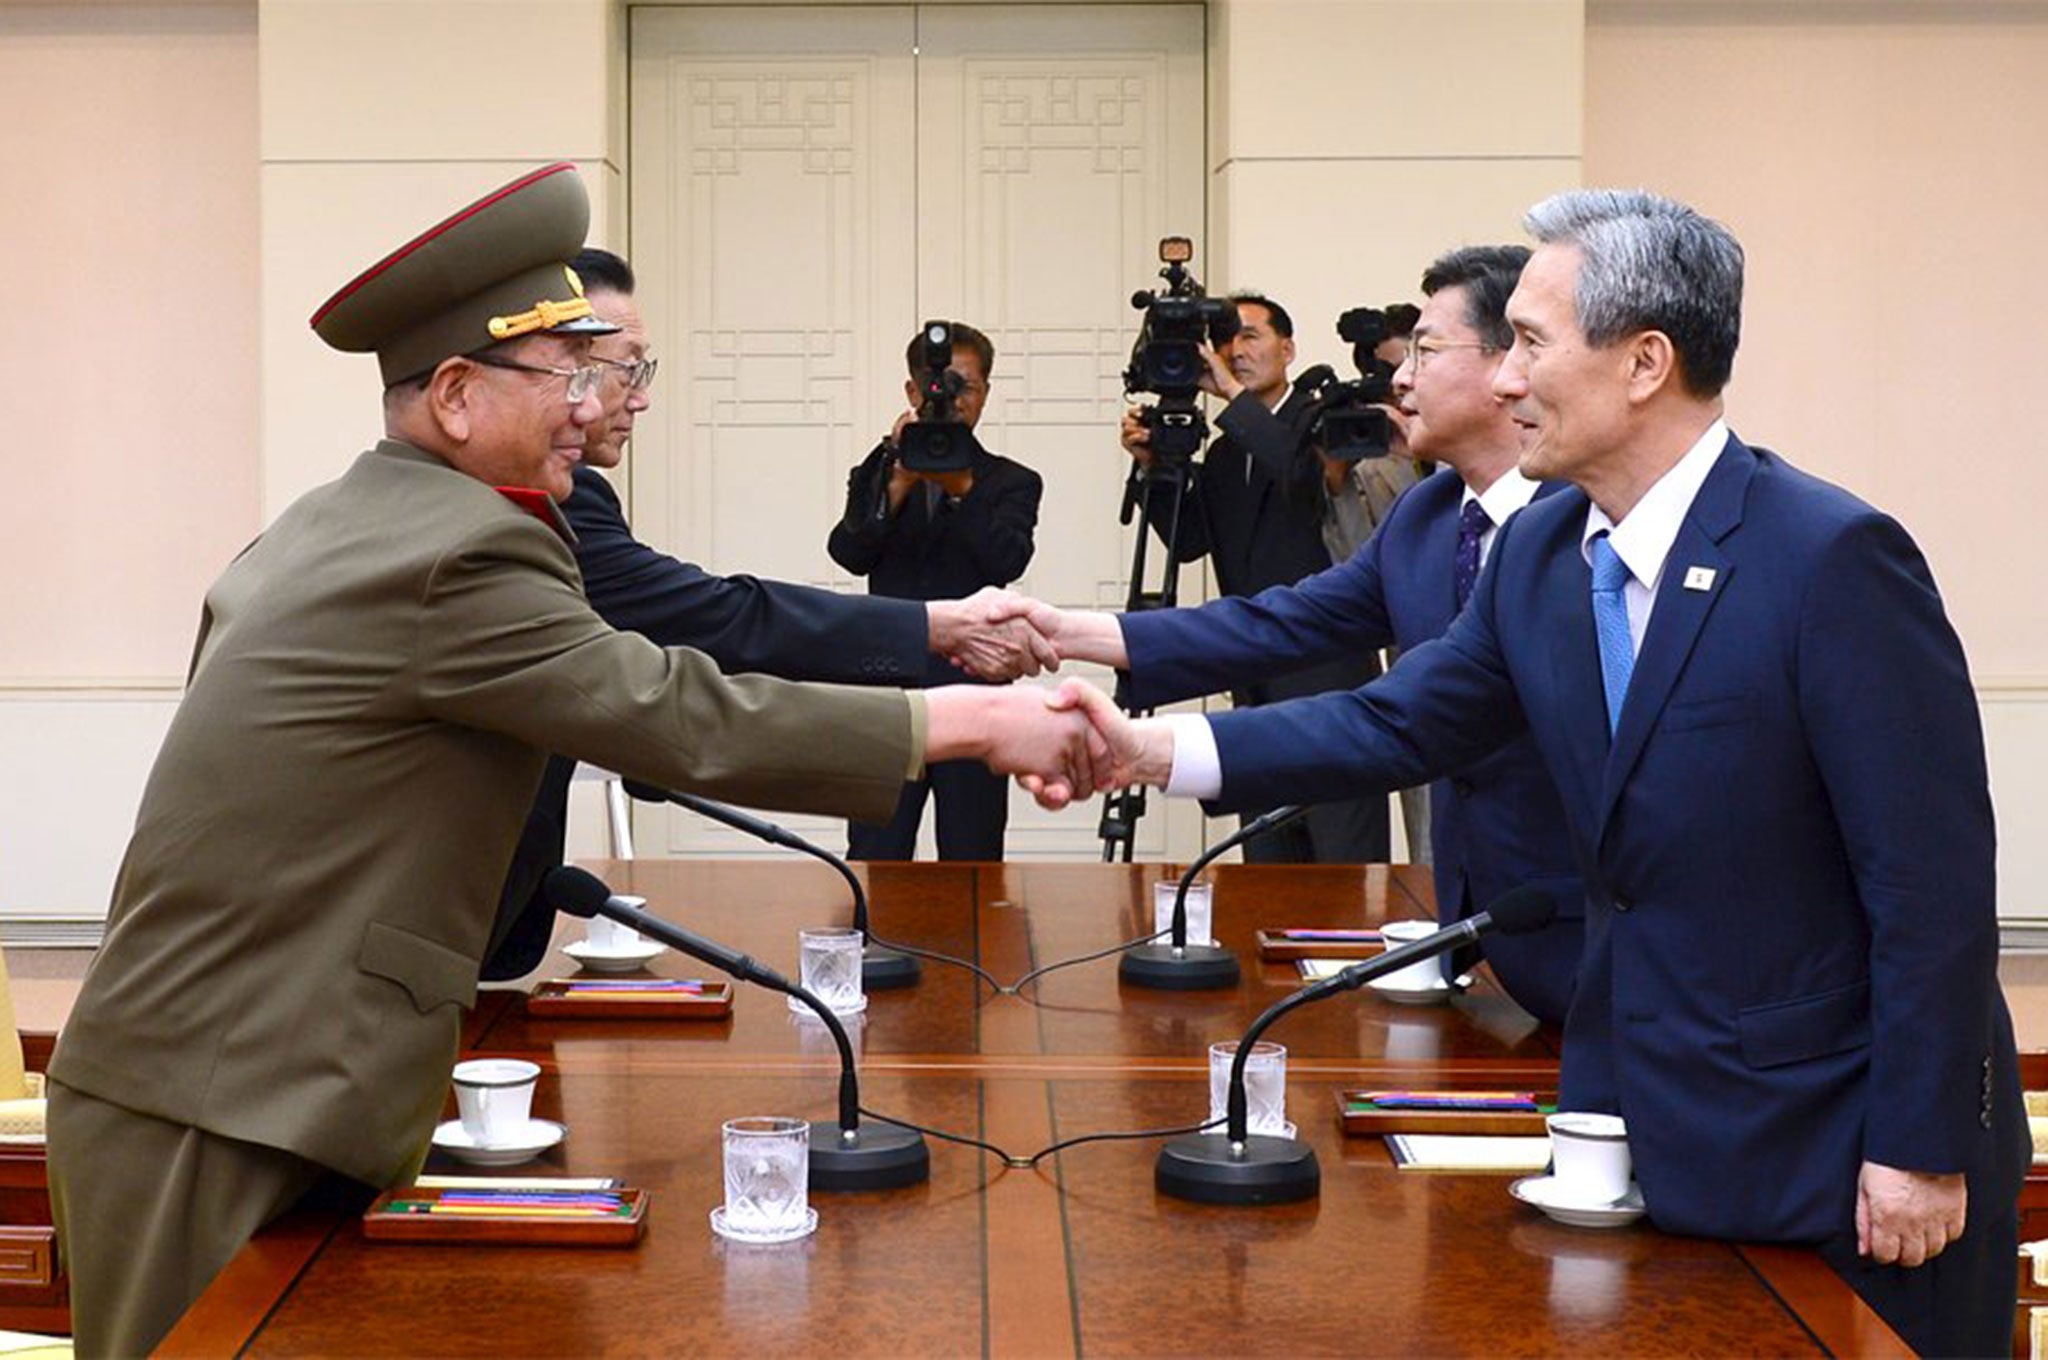 South Korean National Security Adviser Kim Kwan-jin (R), South Korean Unification Minister Hong Yong-pyo (2nd R), Secretary of the Central Committee of the Workers' Party of Korea Kim Yang Gon (2nd L), and the top military aide to the North's leader Kim Jong Un Hwang Pyong-so (L), shake hands during high-level talks at the truce village of Panmunjom